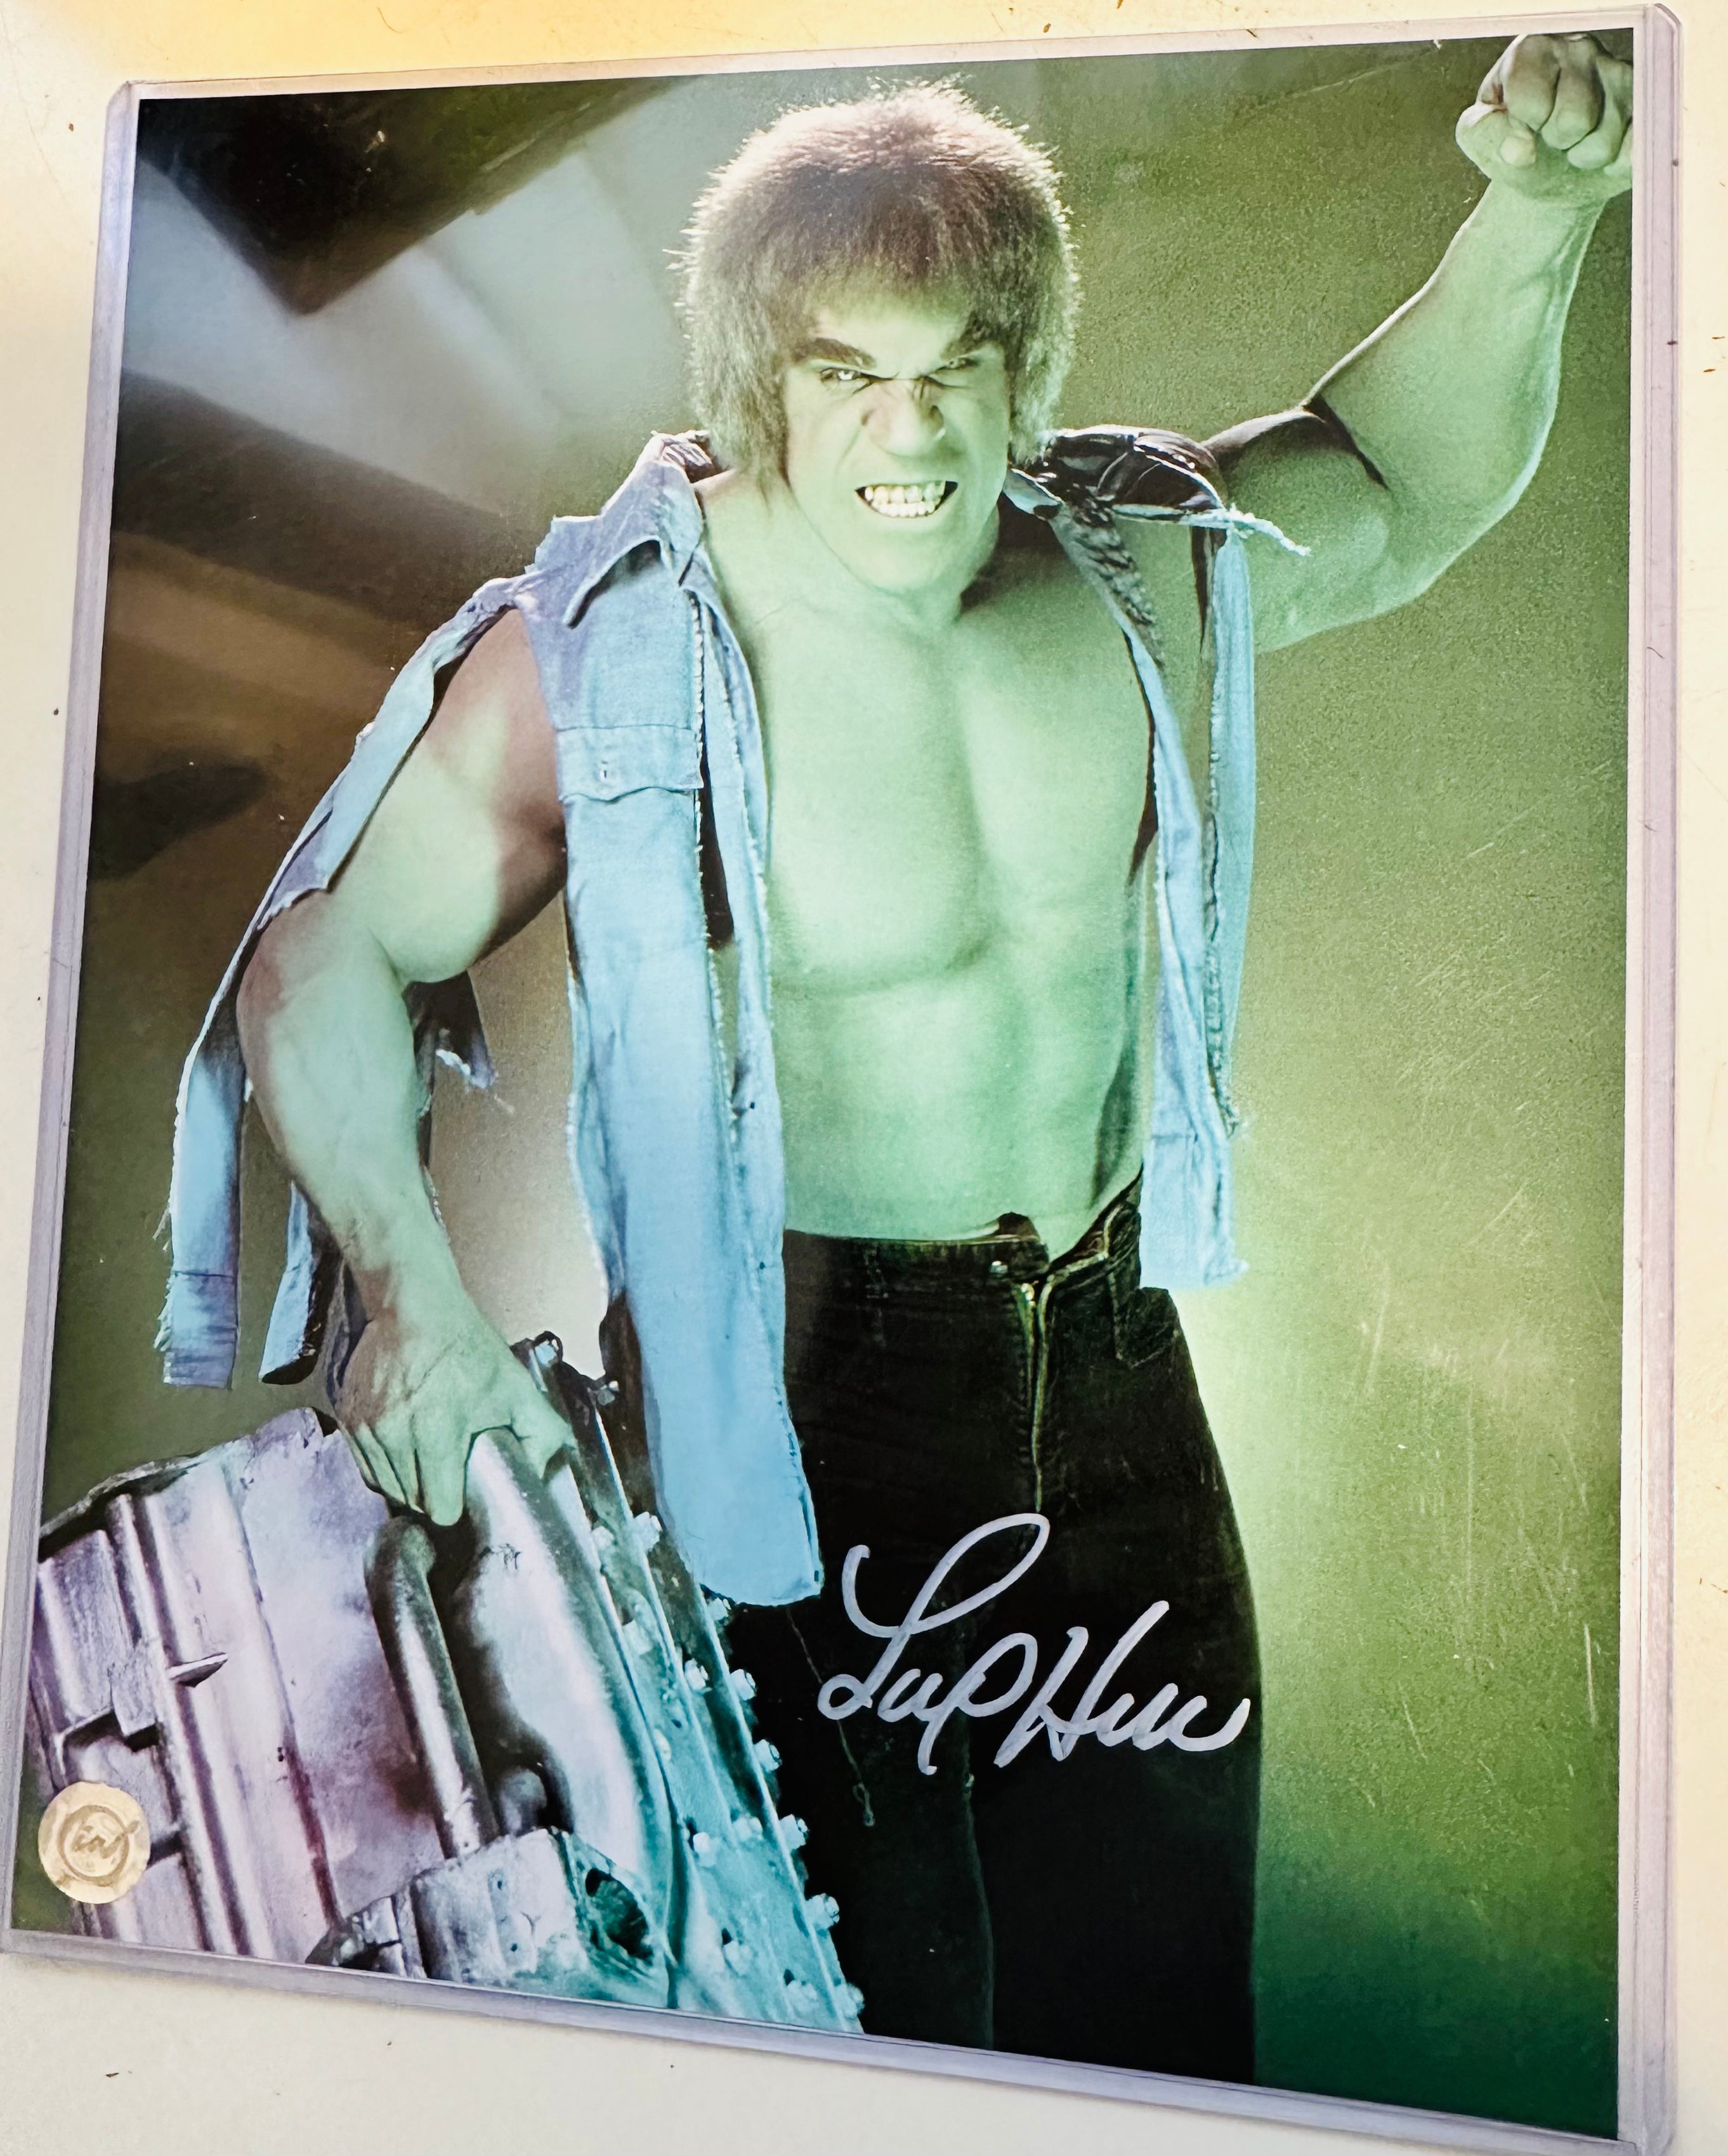 The Incredible Hulk Lou Ferrigno Autographed 8x10 photo with card certified by Icon